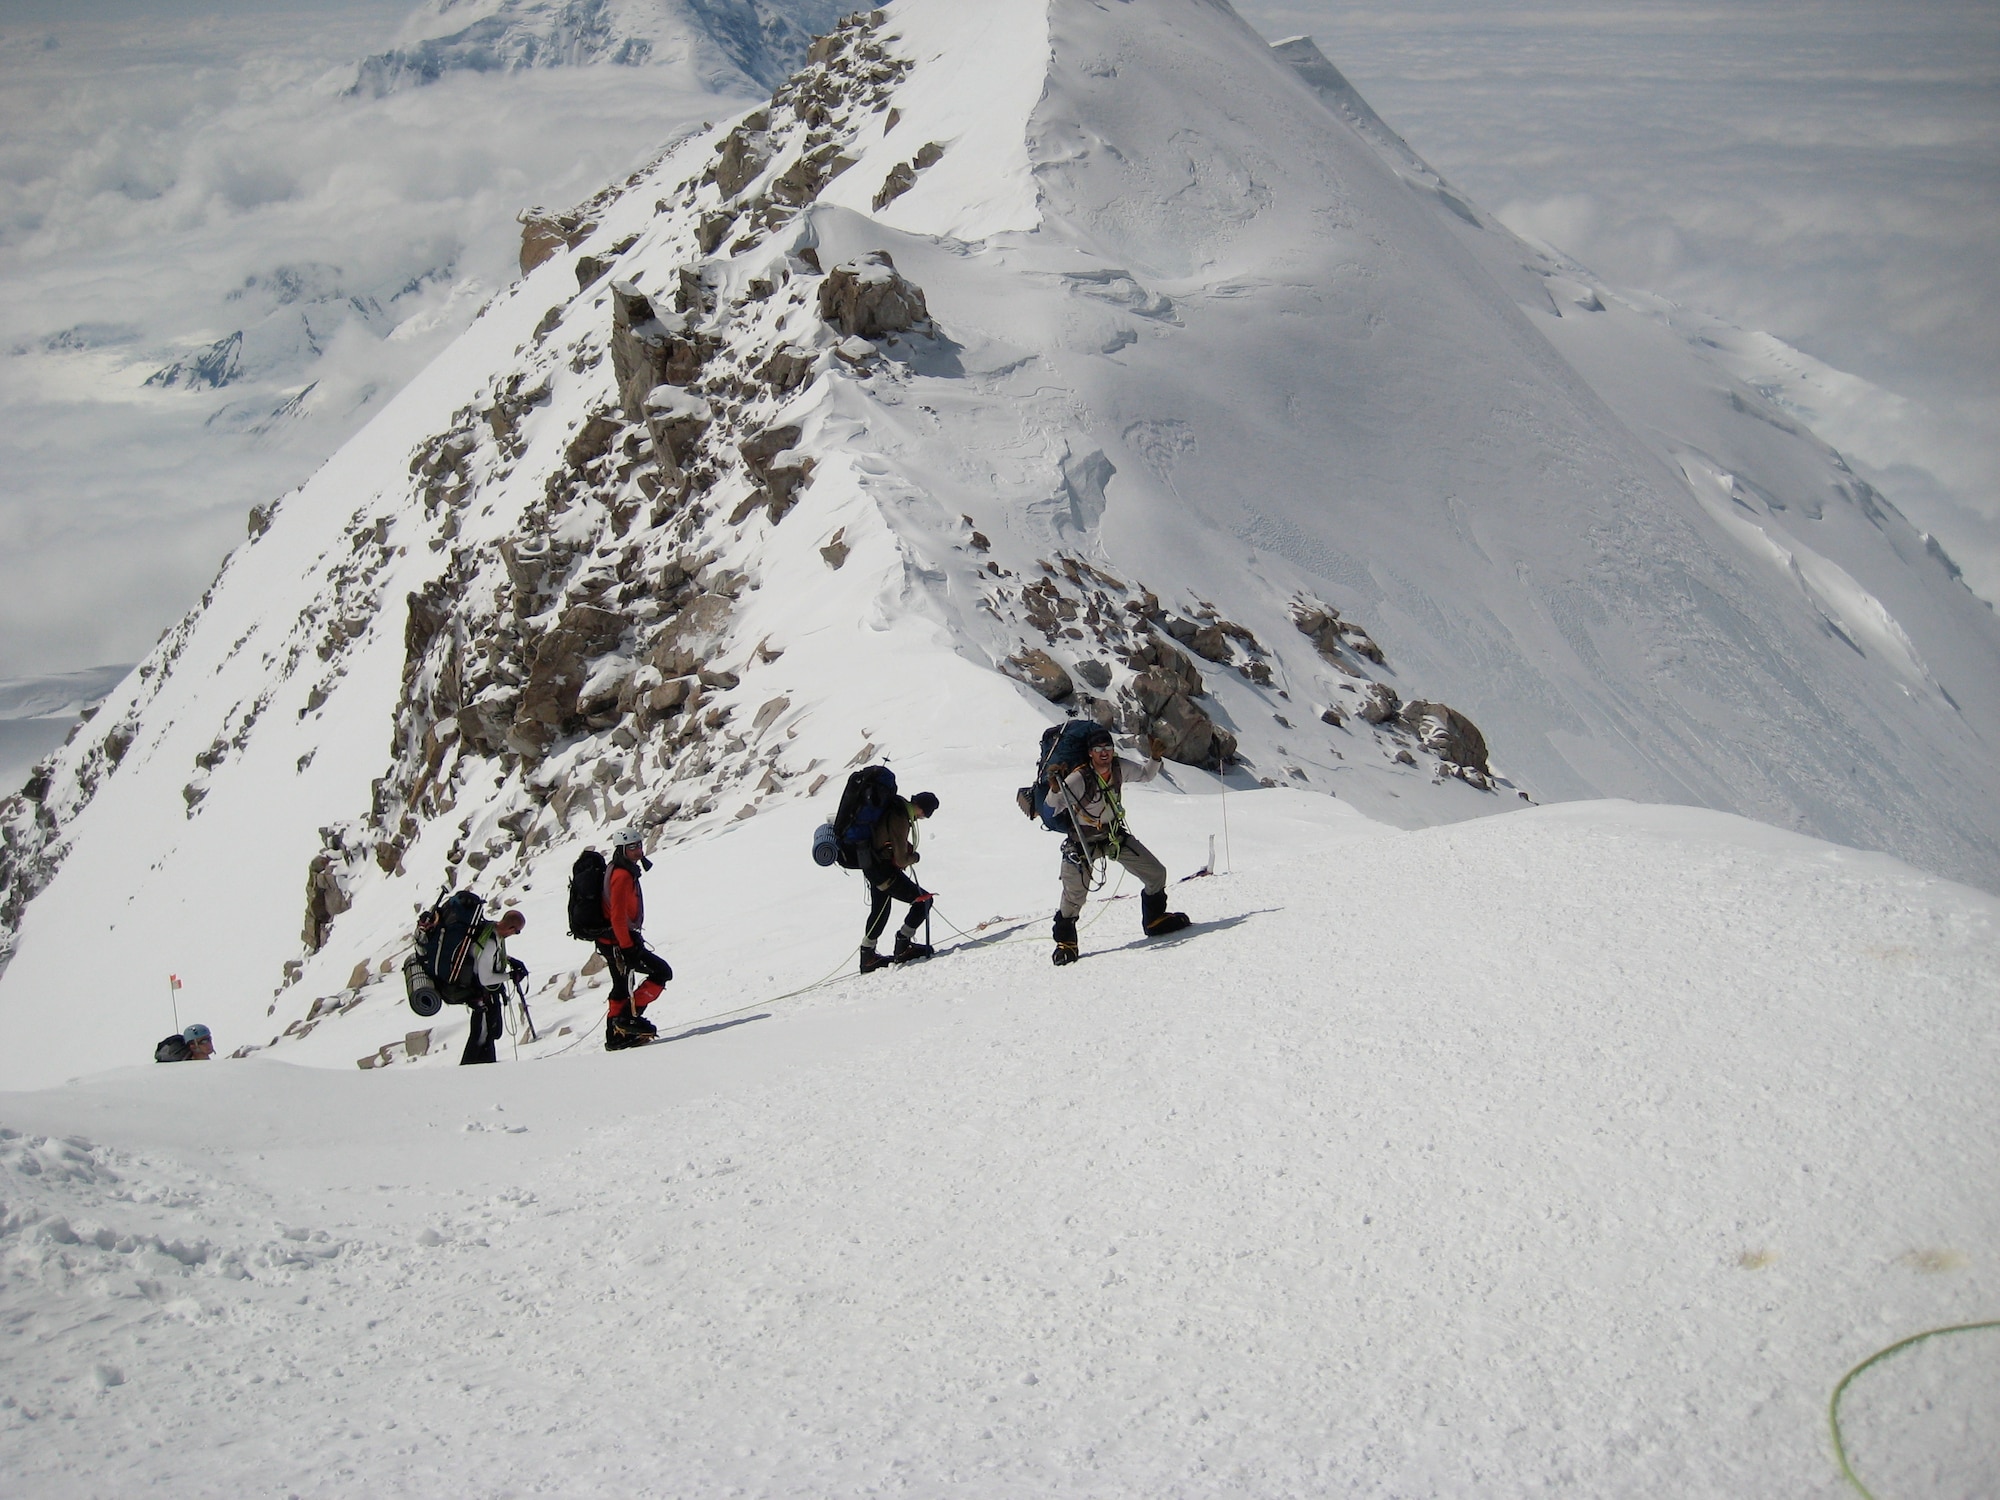 A group of climbers with the U.S. Air Force Seven Summits Challenge scale the West Buttress of 20,300-foot Mount McKinley, Alaska in June 2008. The challenge, founded by Capt. Rob Marshall, 8th Special Operations Squadron, and Capt. Mark Uberuaga, 55th Rescue Squadron, aims to lead a team of Air Force members to the top of the highest mountain on each continent and serves as a fundraiser for the Special Operations Warrior Foundation. (U.S. Air Force photo by Capt. Mark Uberuaga)